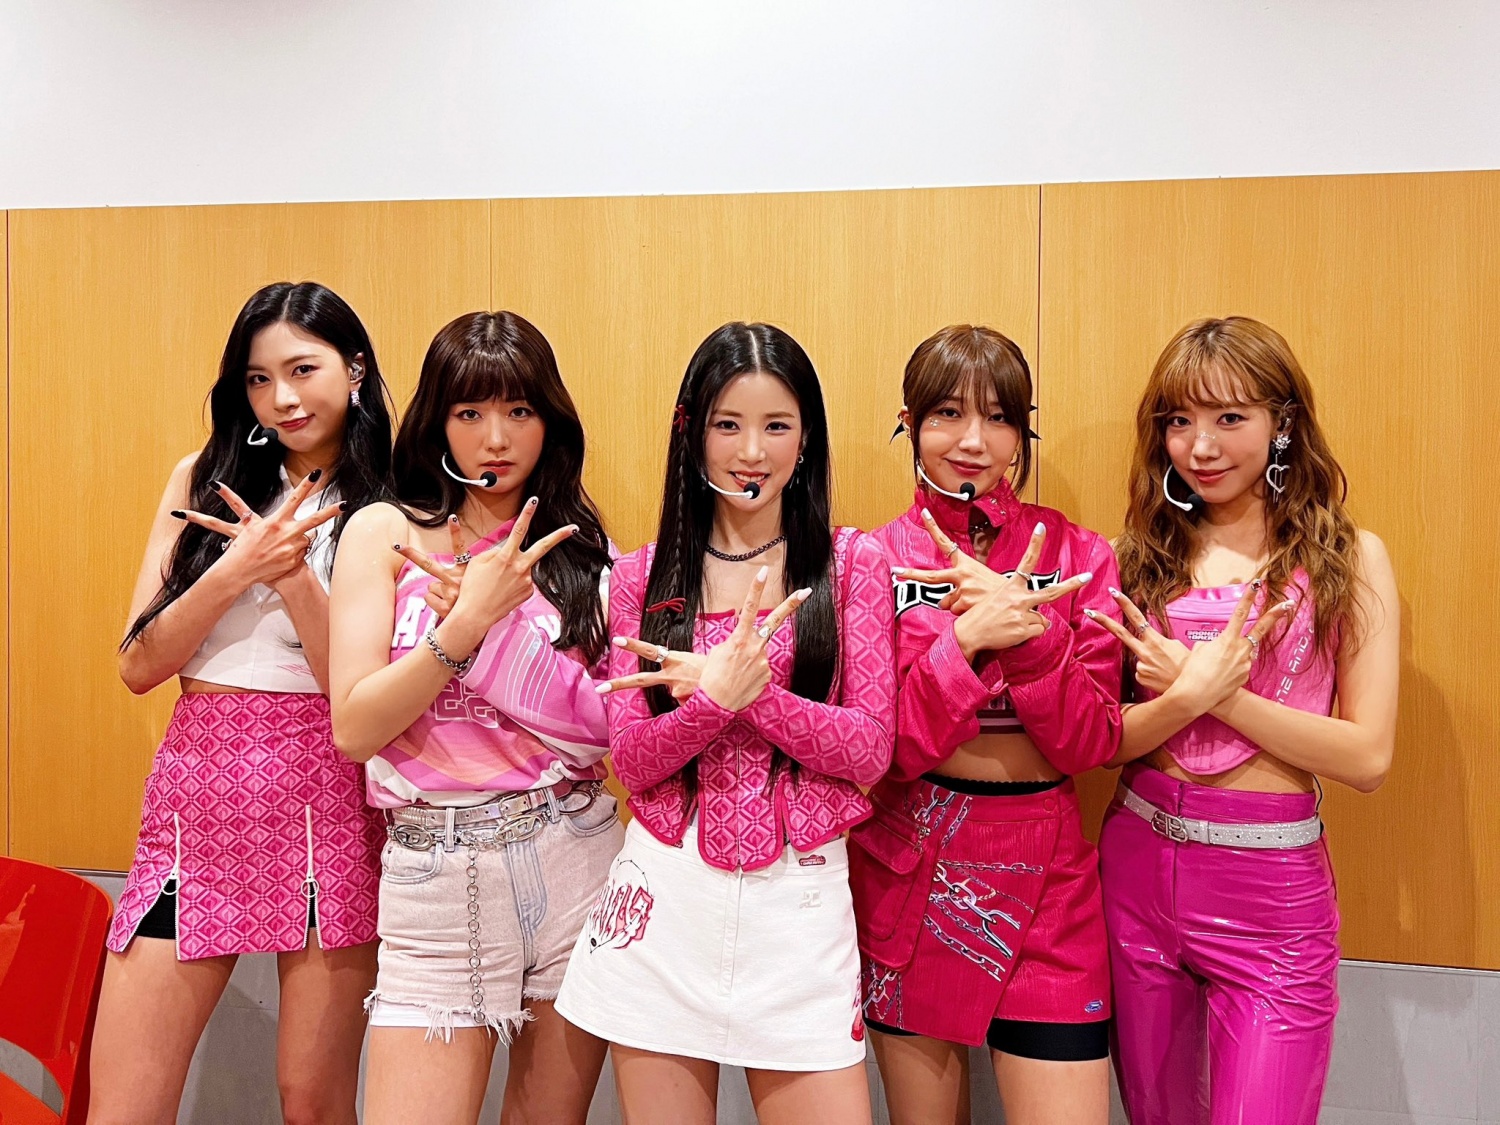 Apink successfully wraps up fan concert in Japan... "Every moment is happy"